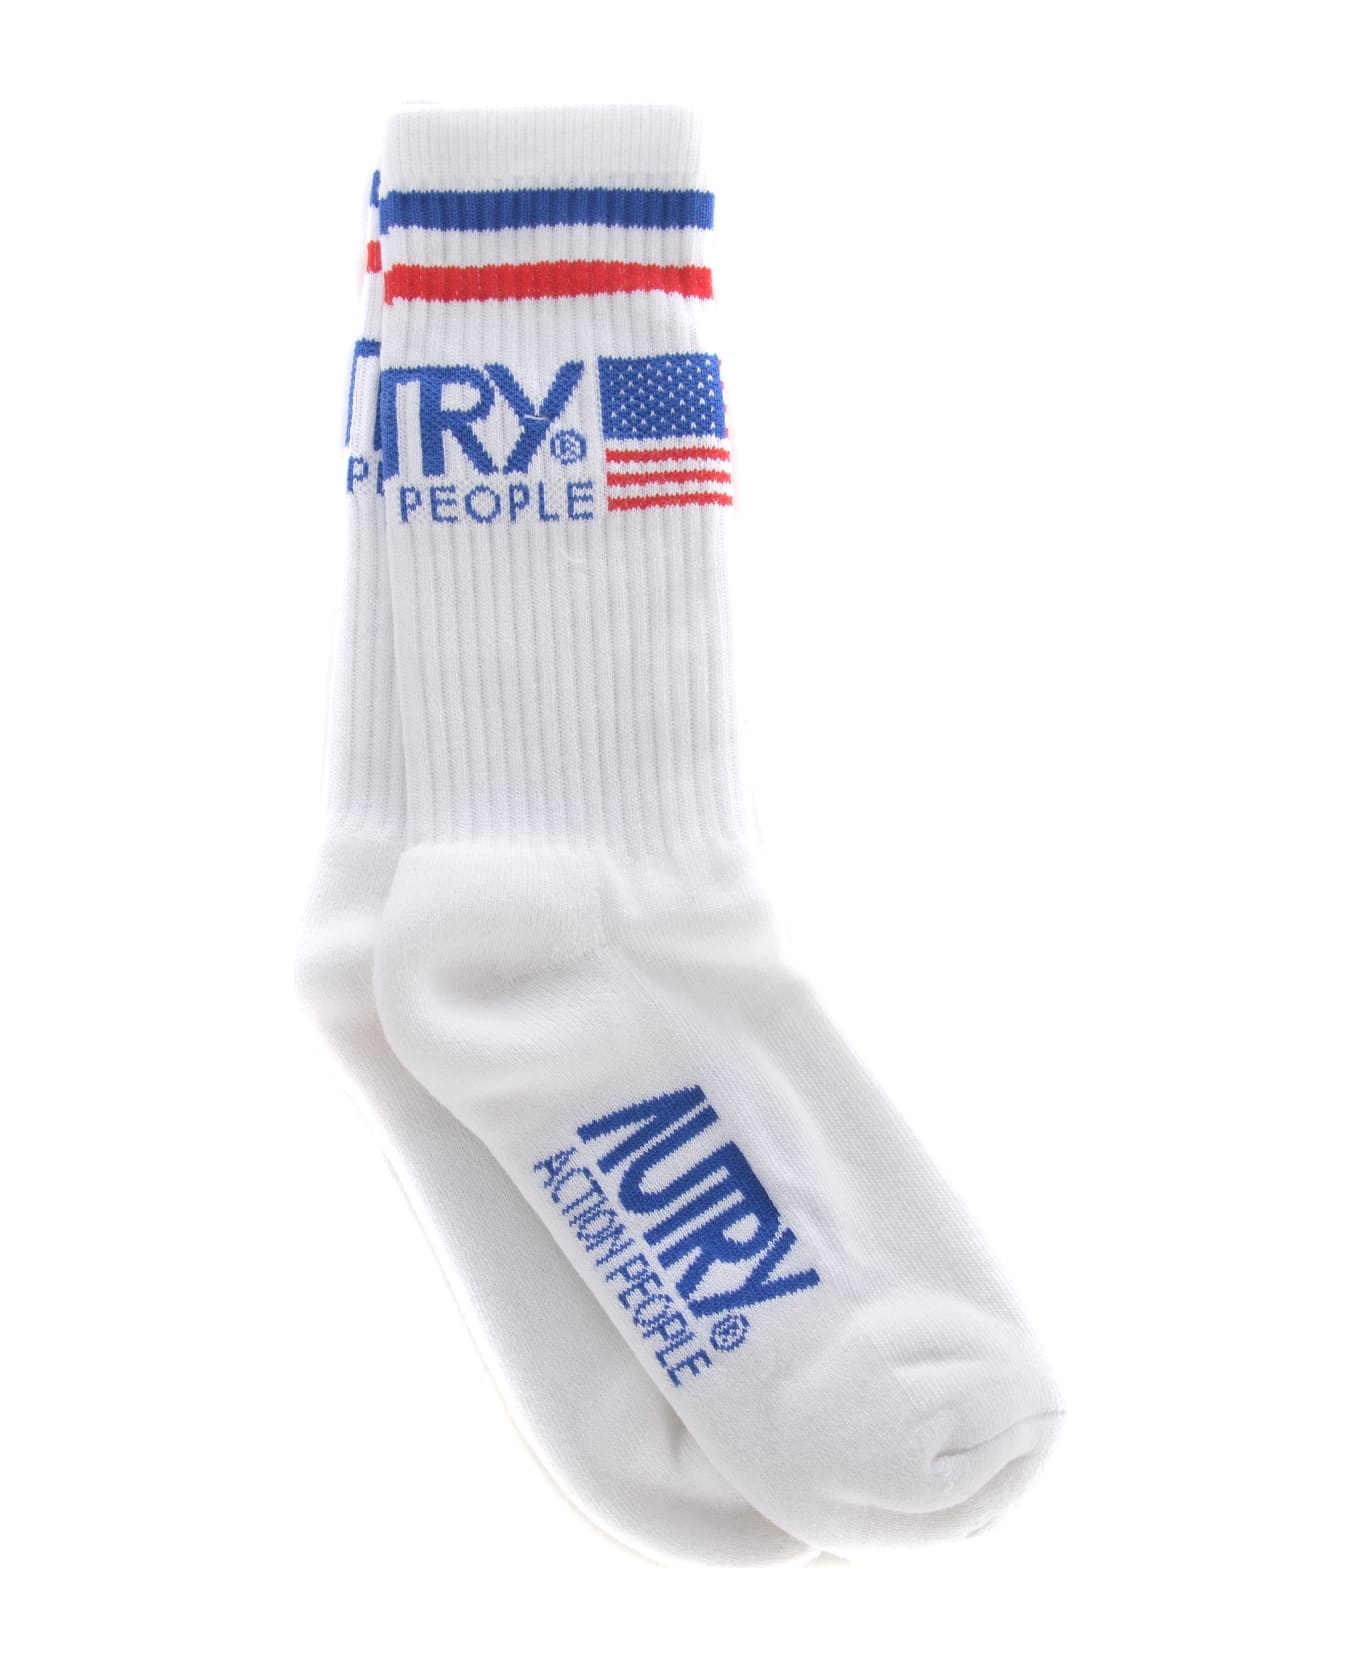 Autry Socks Autry In Stretch Cotton - Bianco 靴下